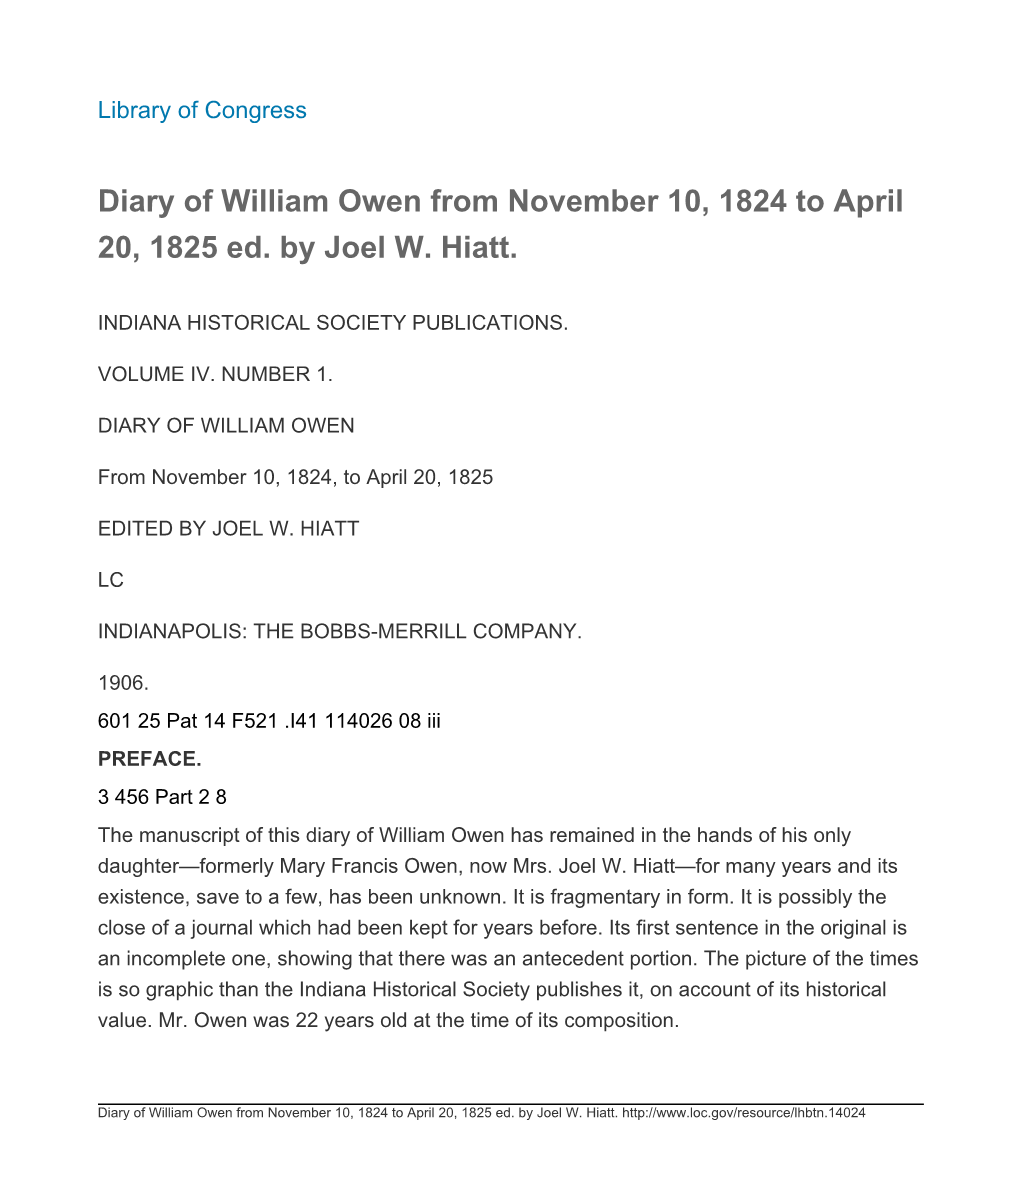 Diary of William Owen from November 10, 1824 to April 20, 1825 Ed. by Joel W